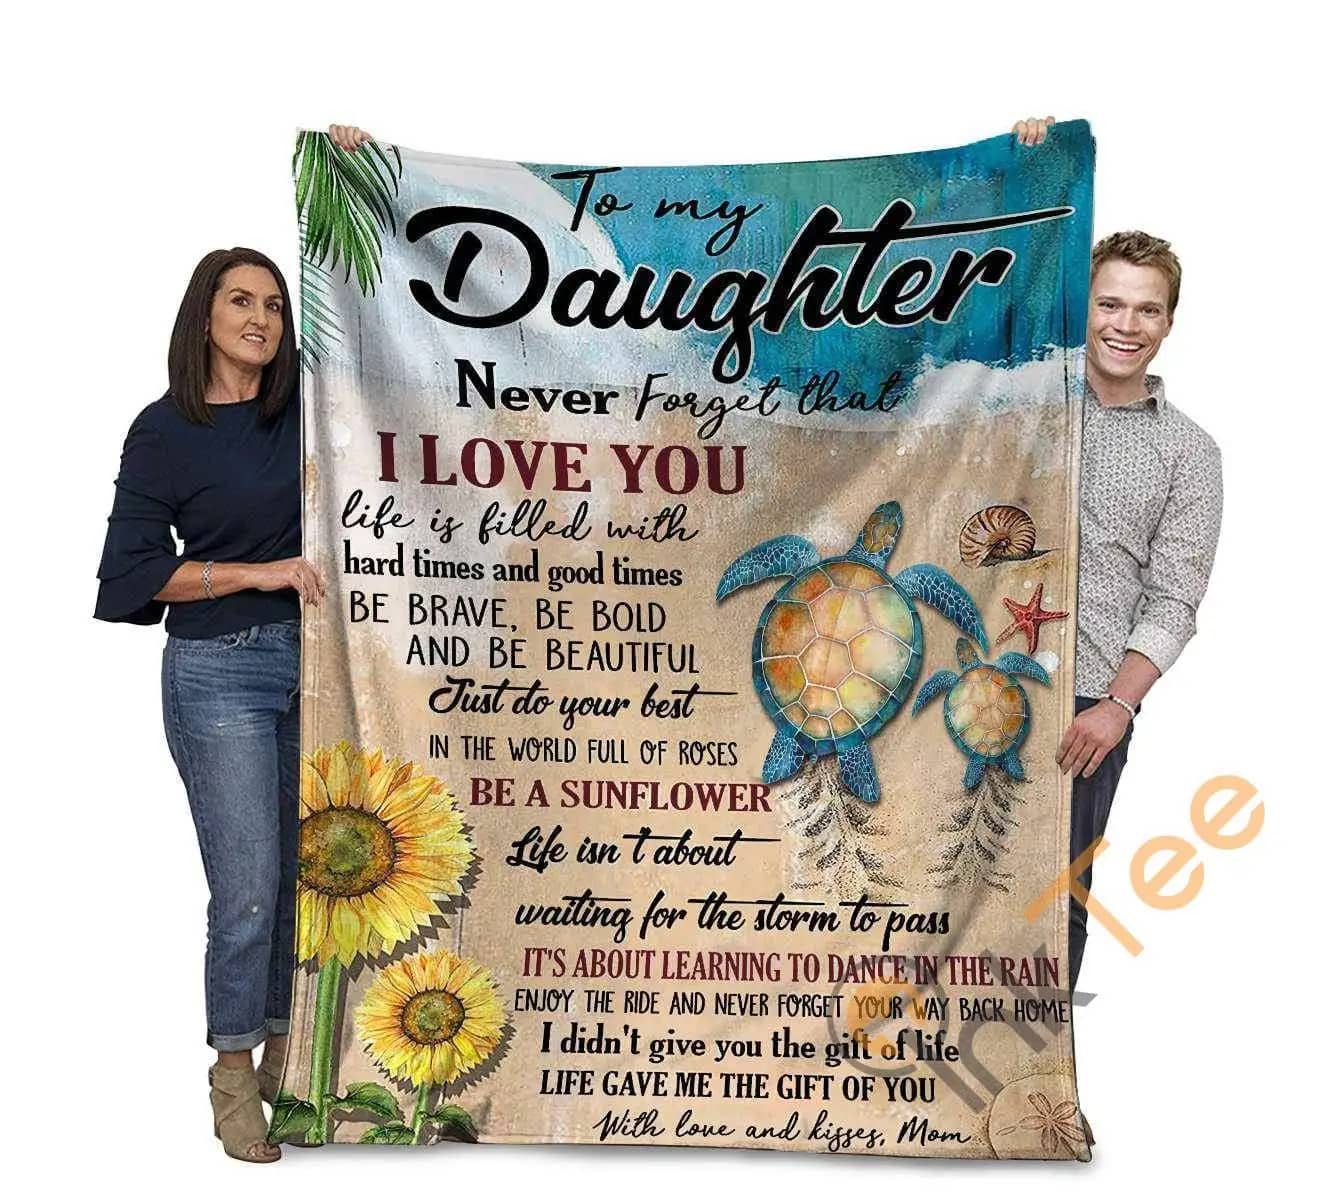 Sea Turtles To My Daughter Never Forget That I Love You Ultra Soft Cozy Plush Fleece Blanket